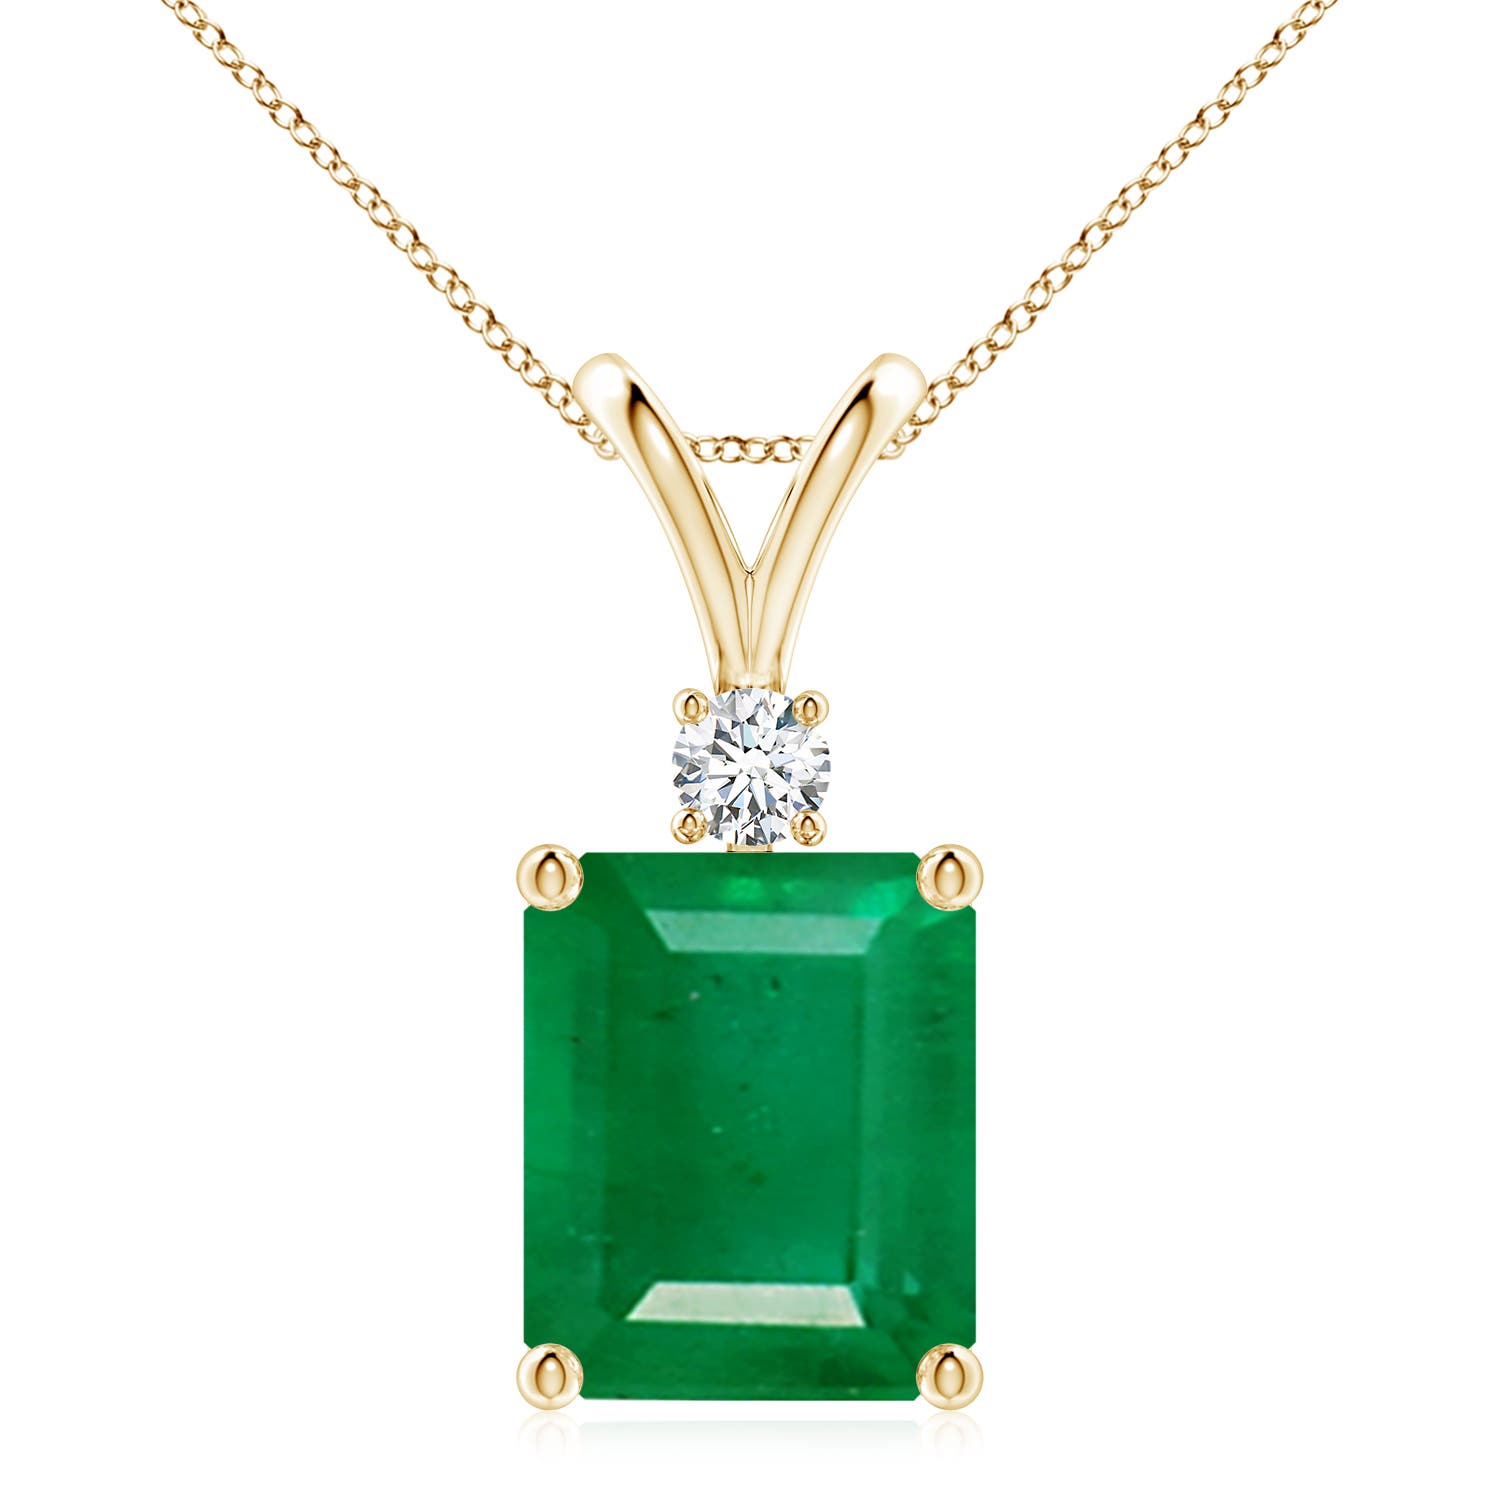 AA - Emerald / 5.91 CT / 14 KT Yellow Gold